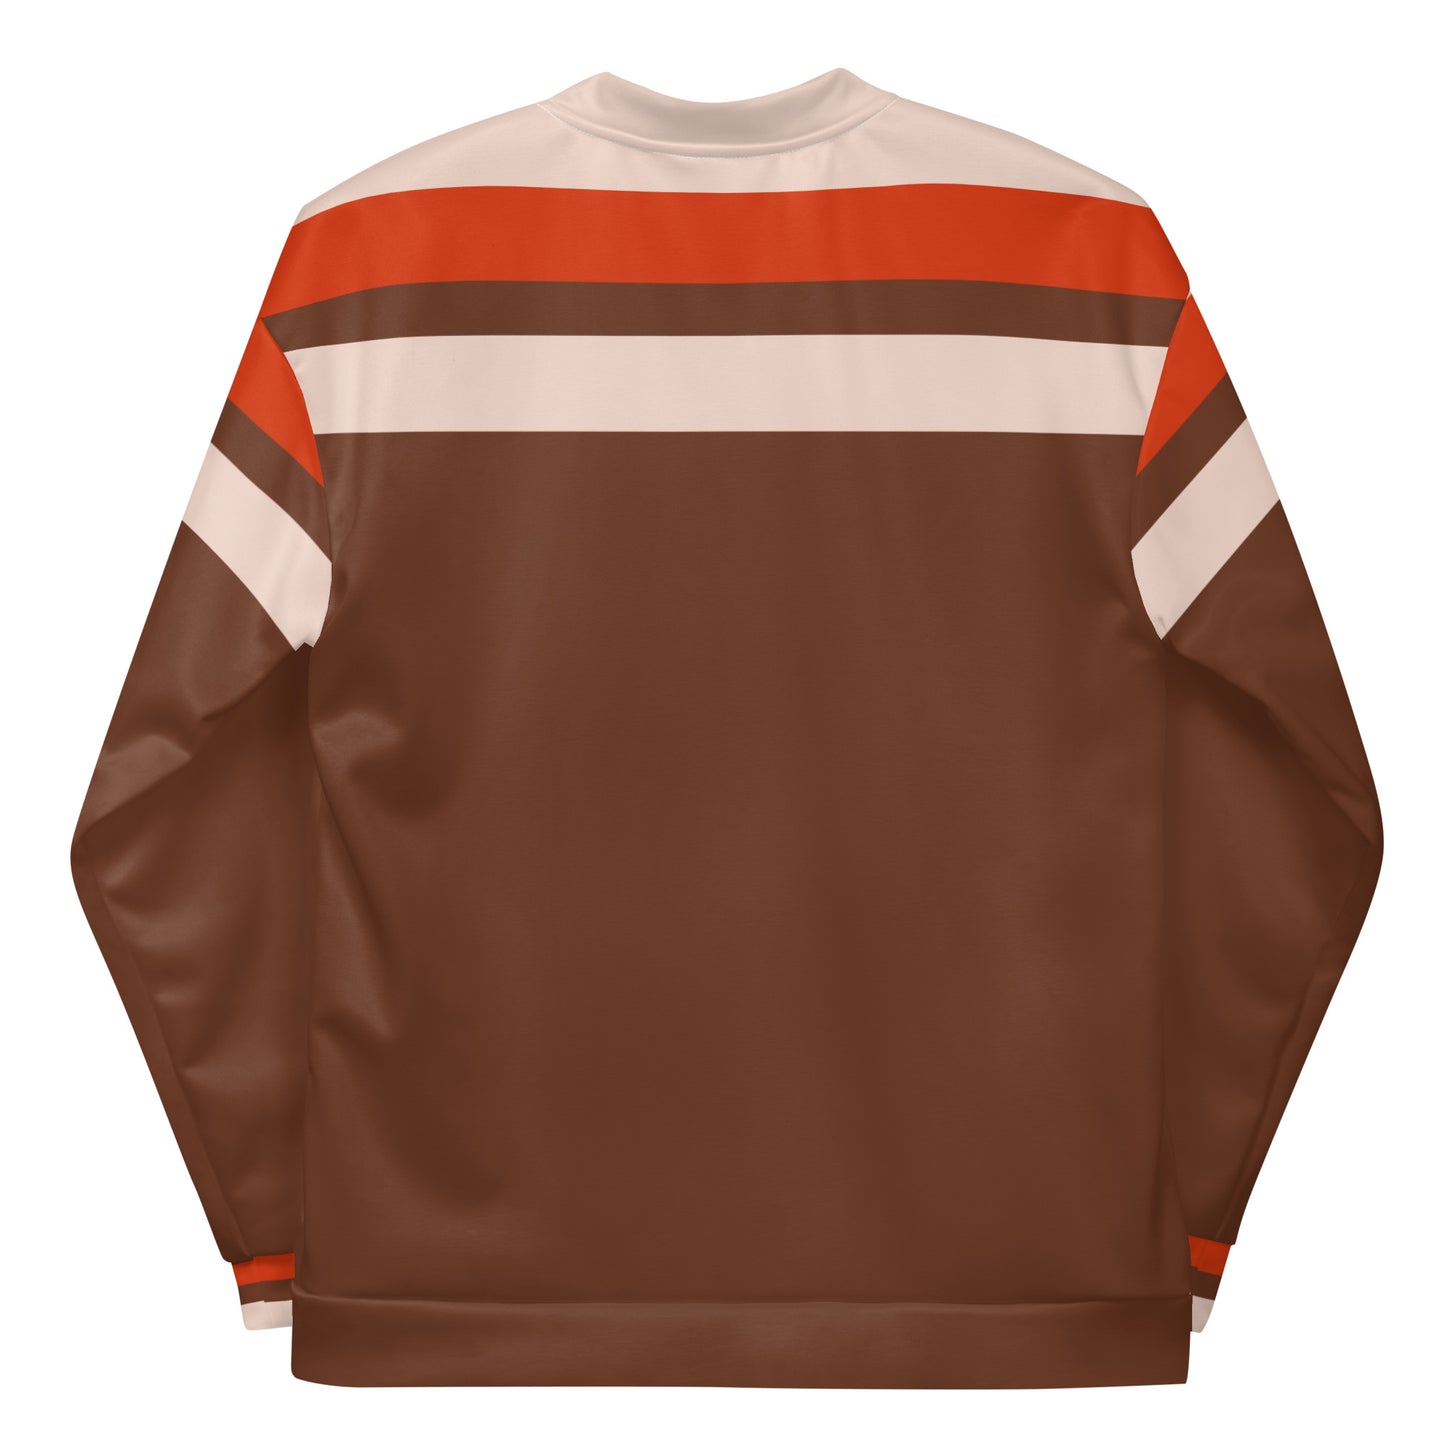 Retro Ambiance - Inspired By Taylor Swift - Sustainably Made Bomber Jacket